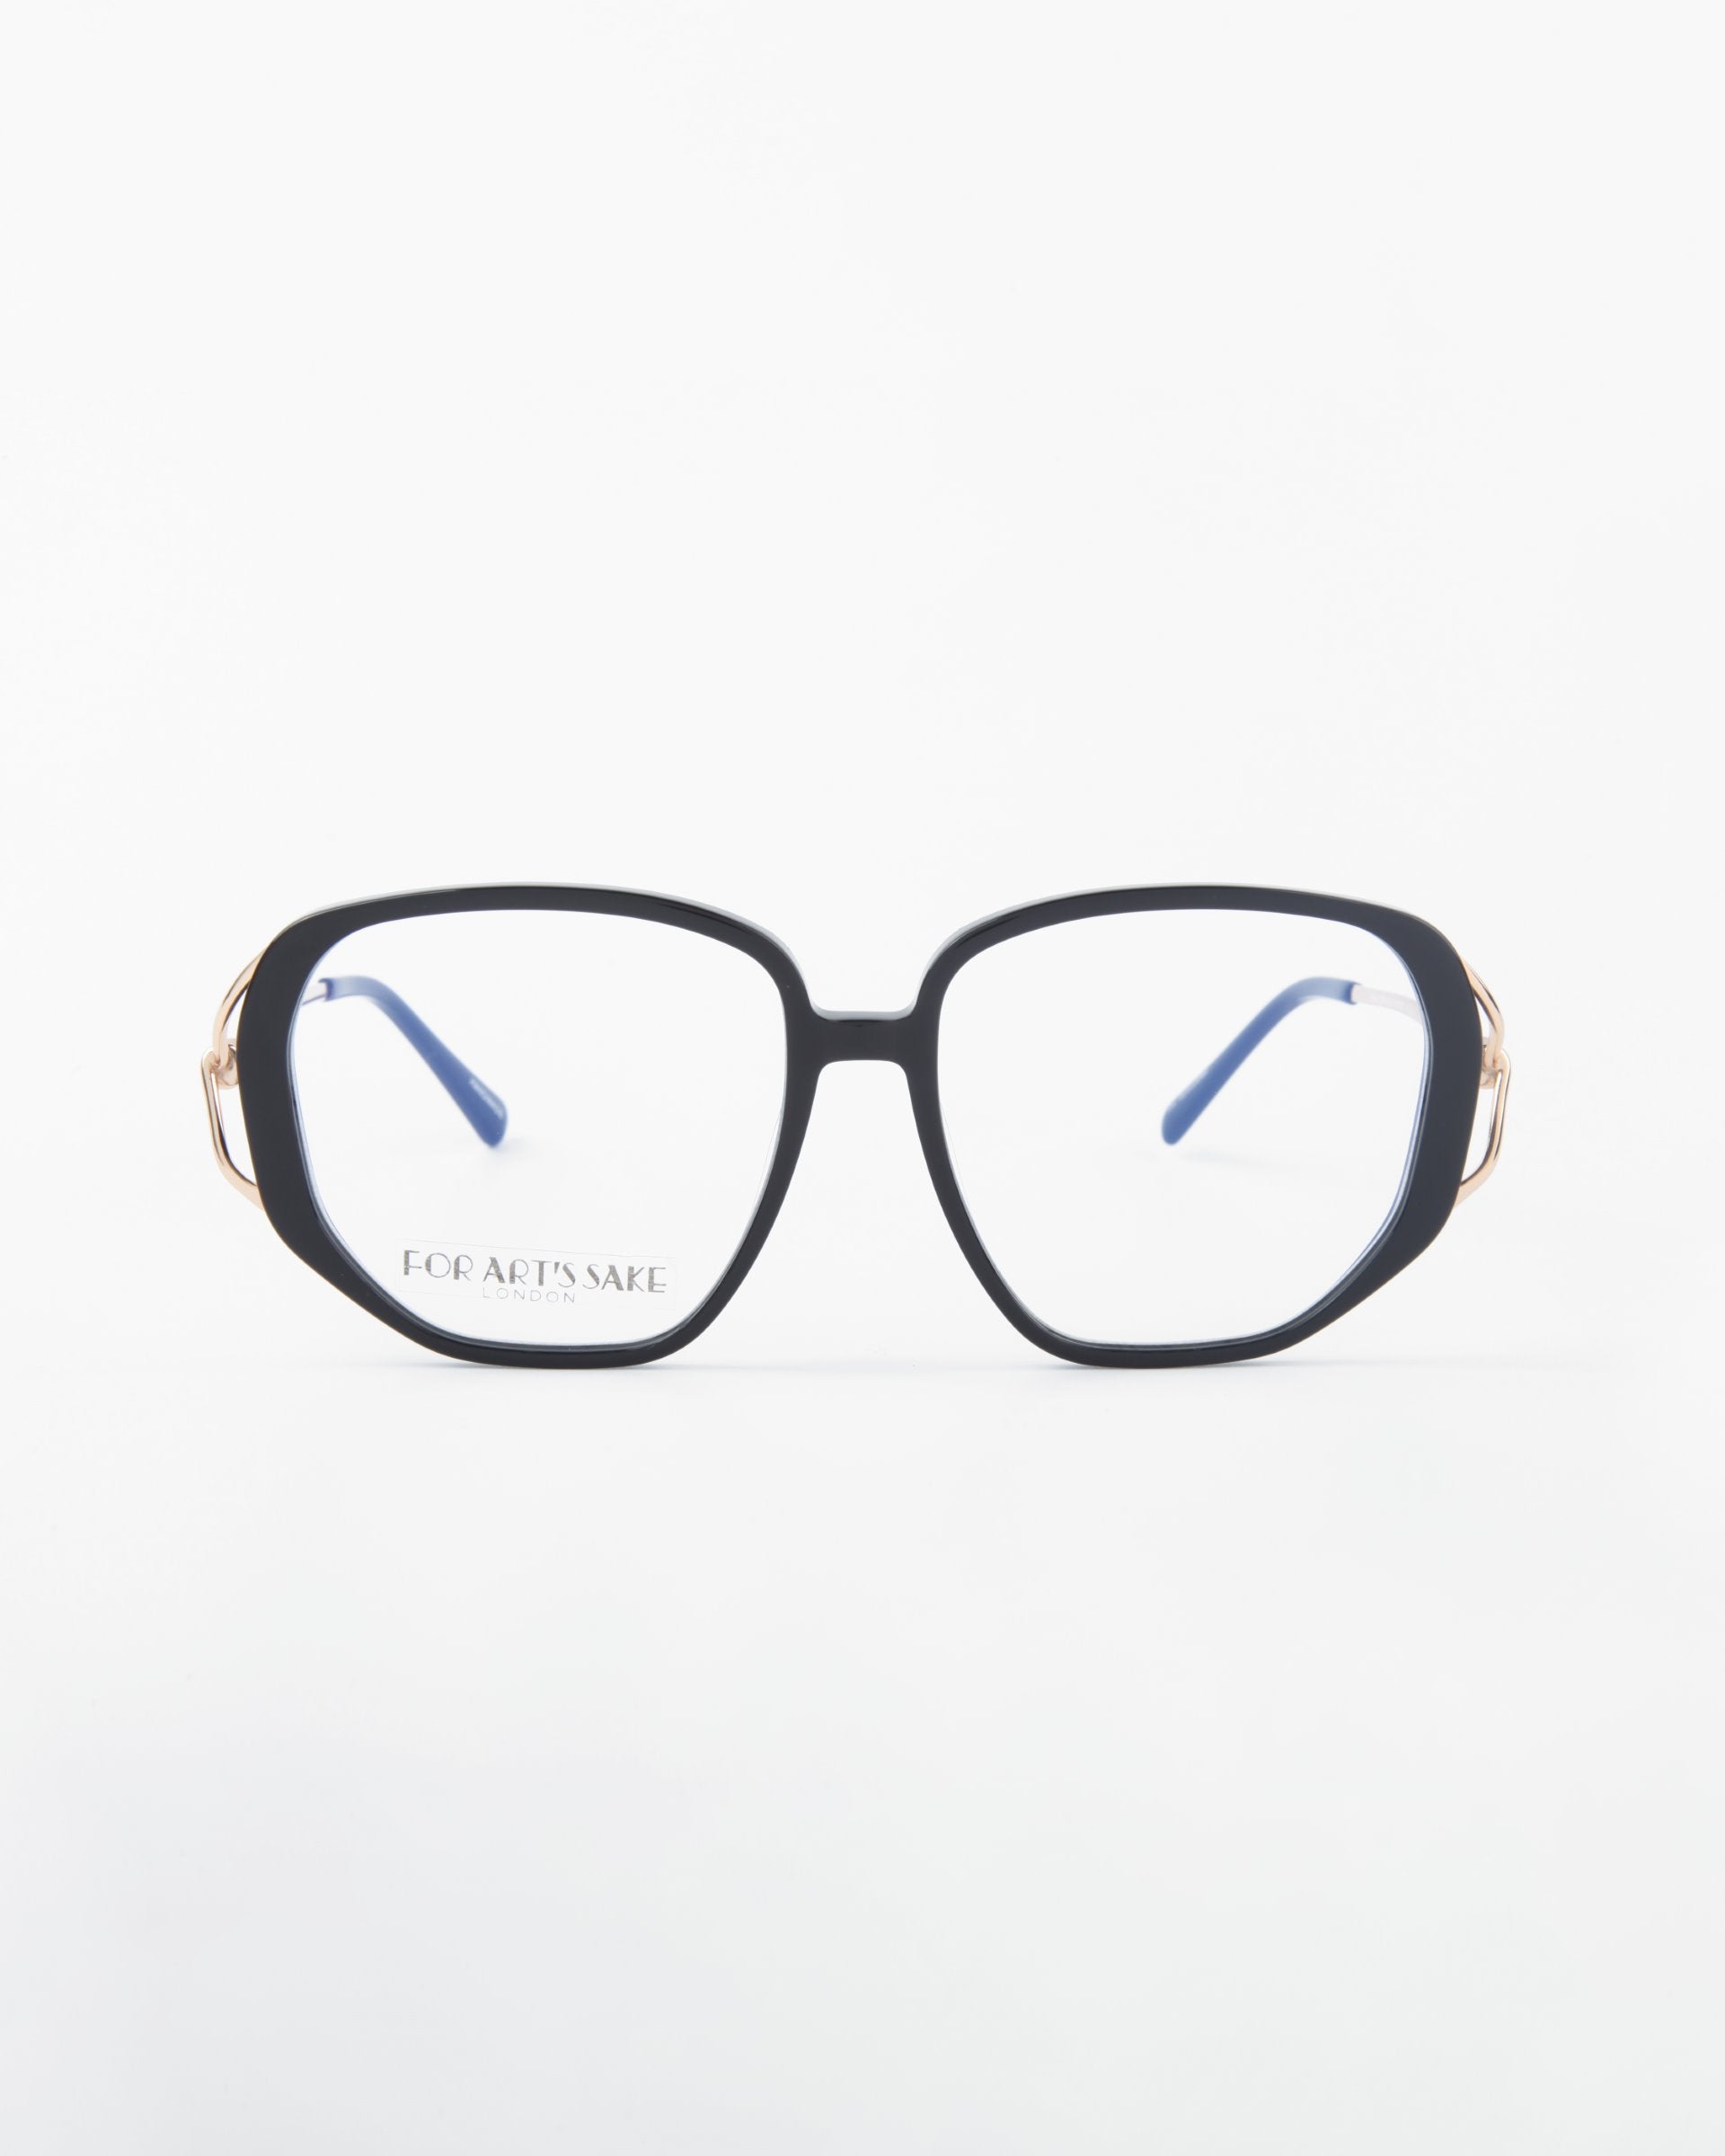 A pair of square-rimmed eyeglasses with black frames and blue temples, incorporating a blue light filter. The brand &quot;For Art&#39;s Sake® Remix&quot; is visible on the left lens against a plain white background.